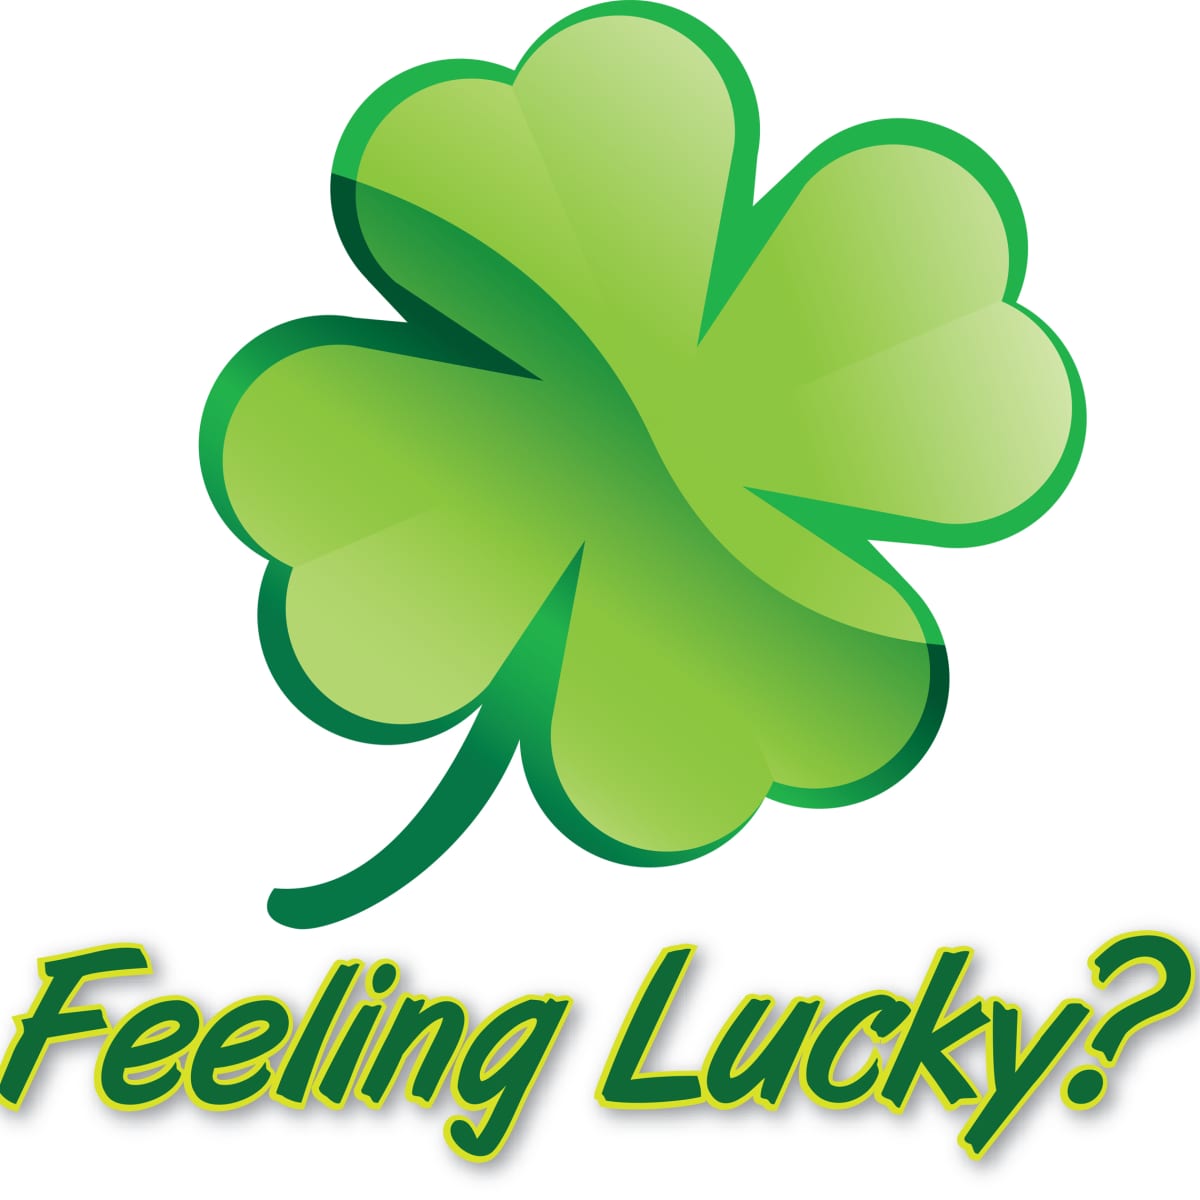 What Is Luck? Are You Lucky? - HubPages